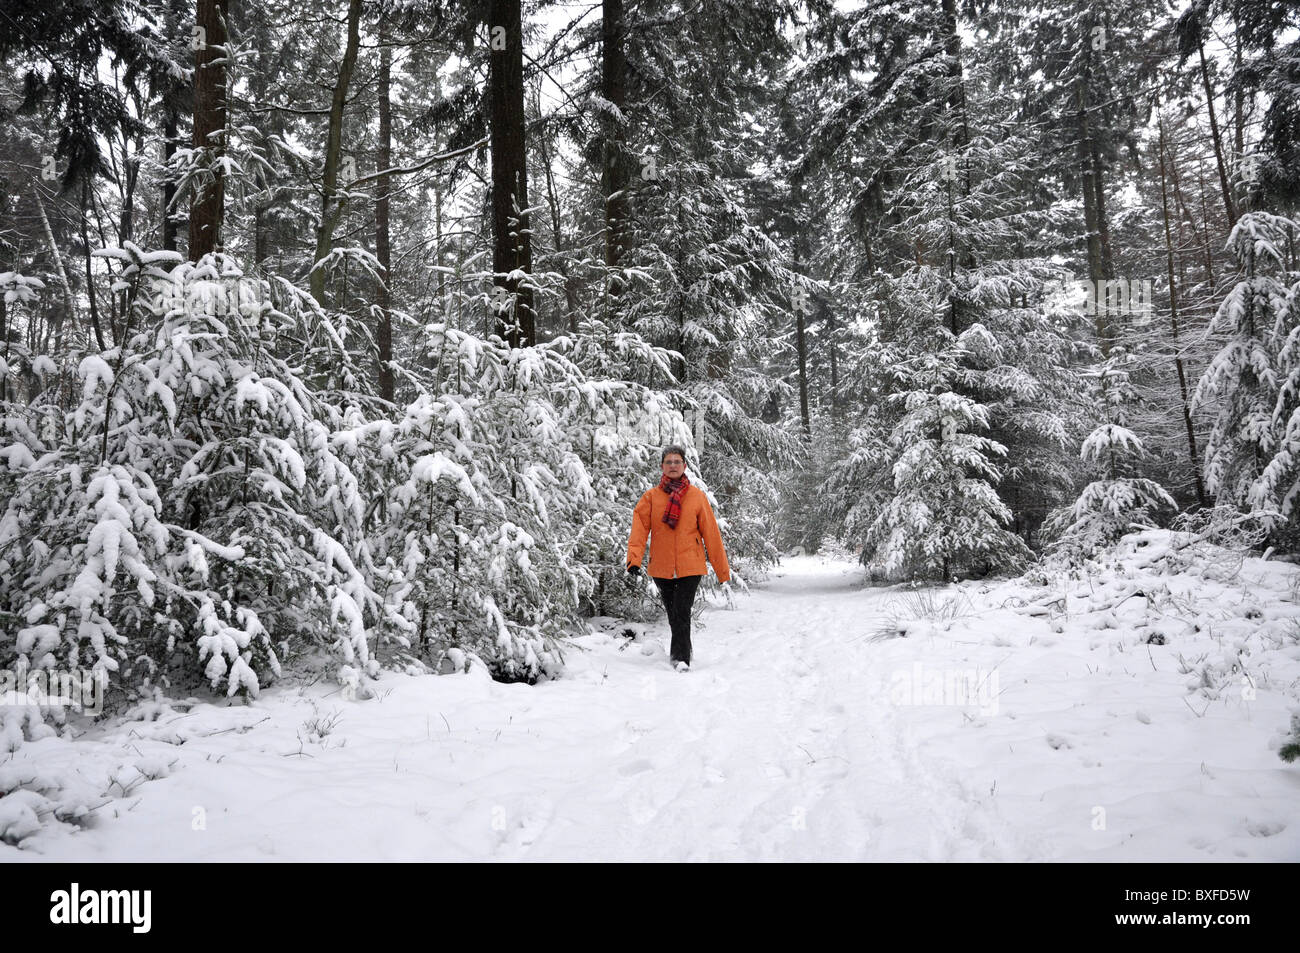 Senior woman walking in a snowy forest with pinetrees Stock Photo